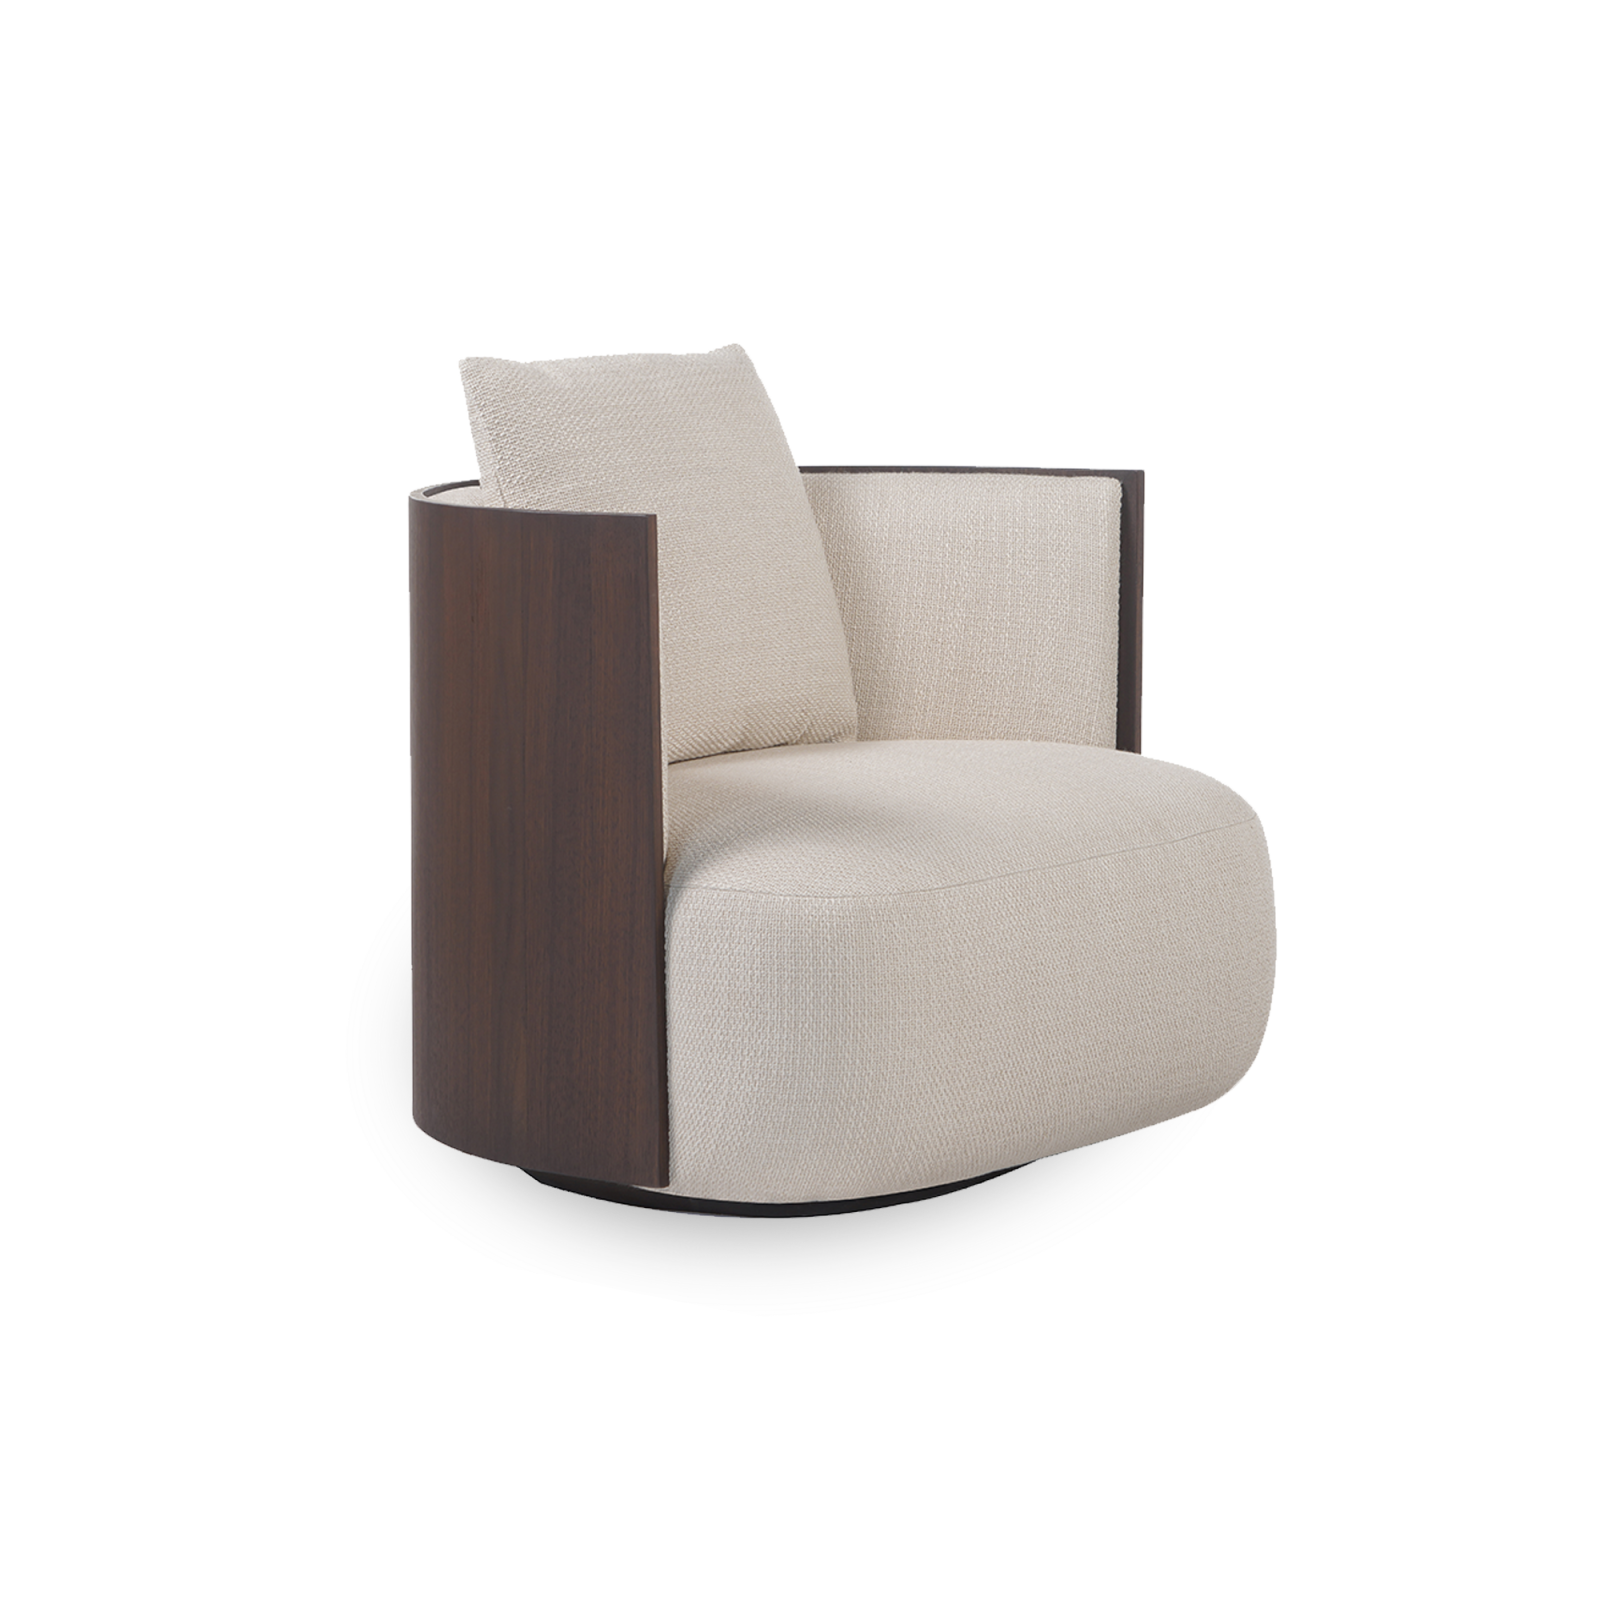 The contrast created by both its softwood seat and wooden veneer back is very much worth exploring and experiencing Marsilia armchair